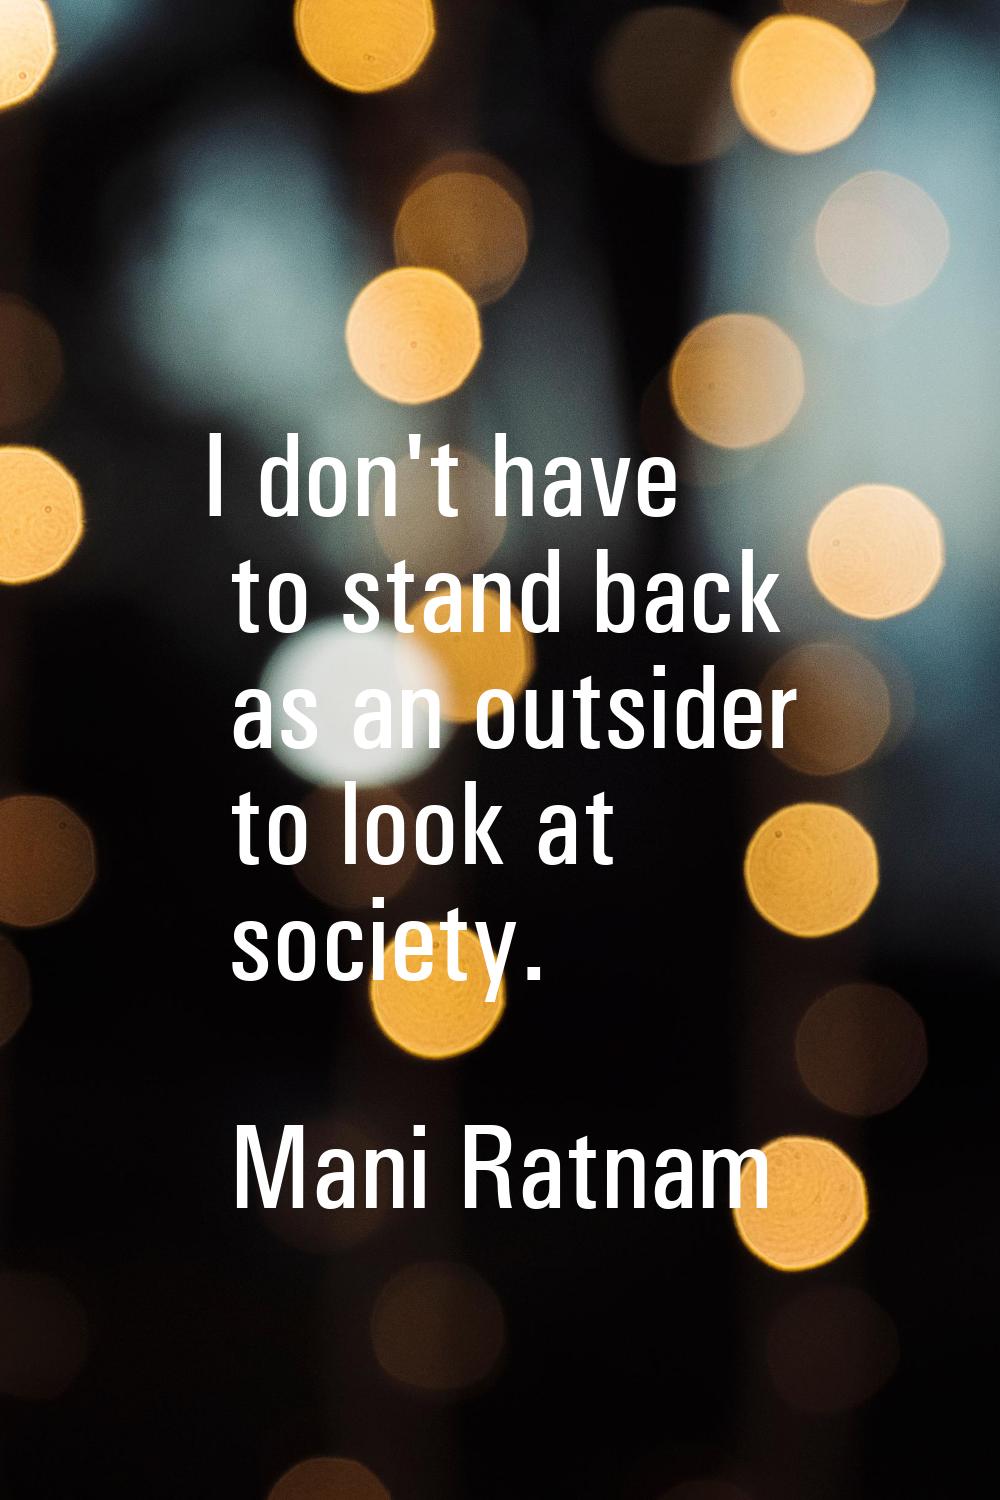 I don't have to stand back as an outsider to look at society.